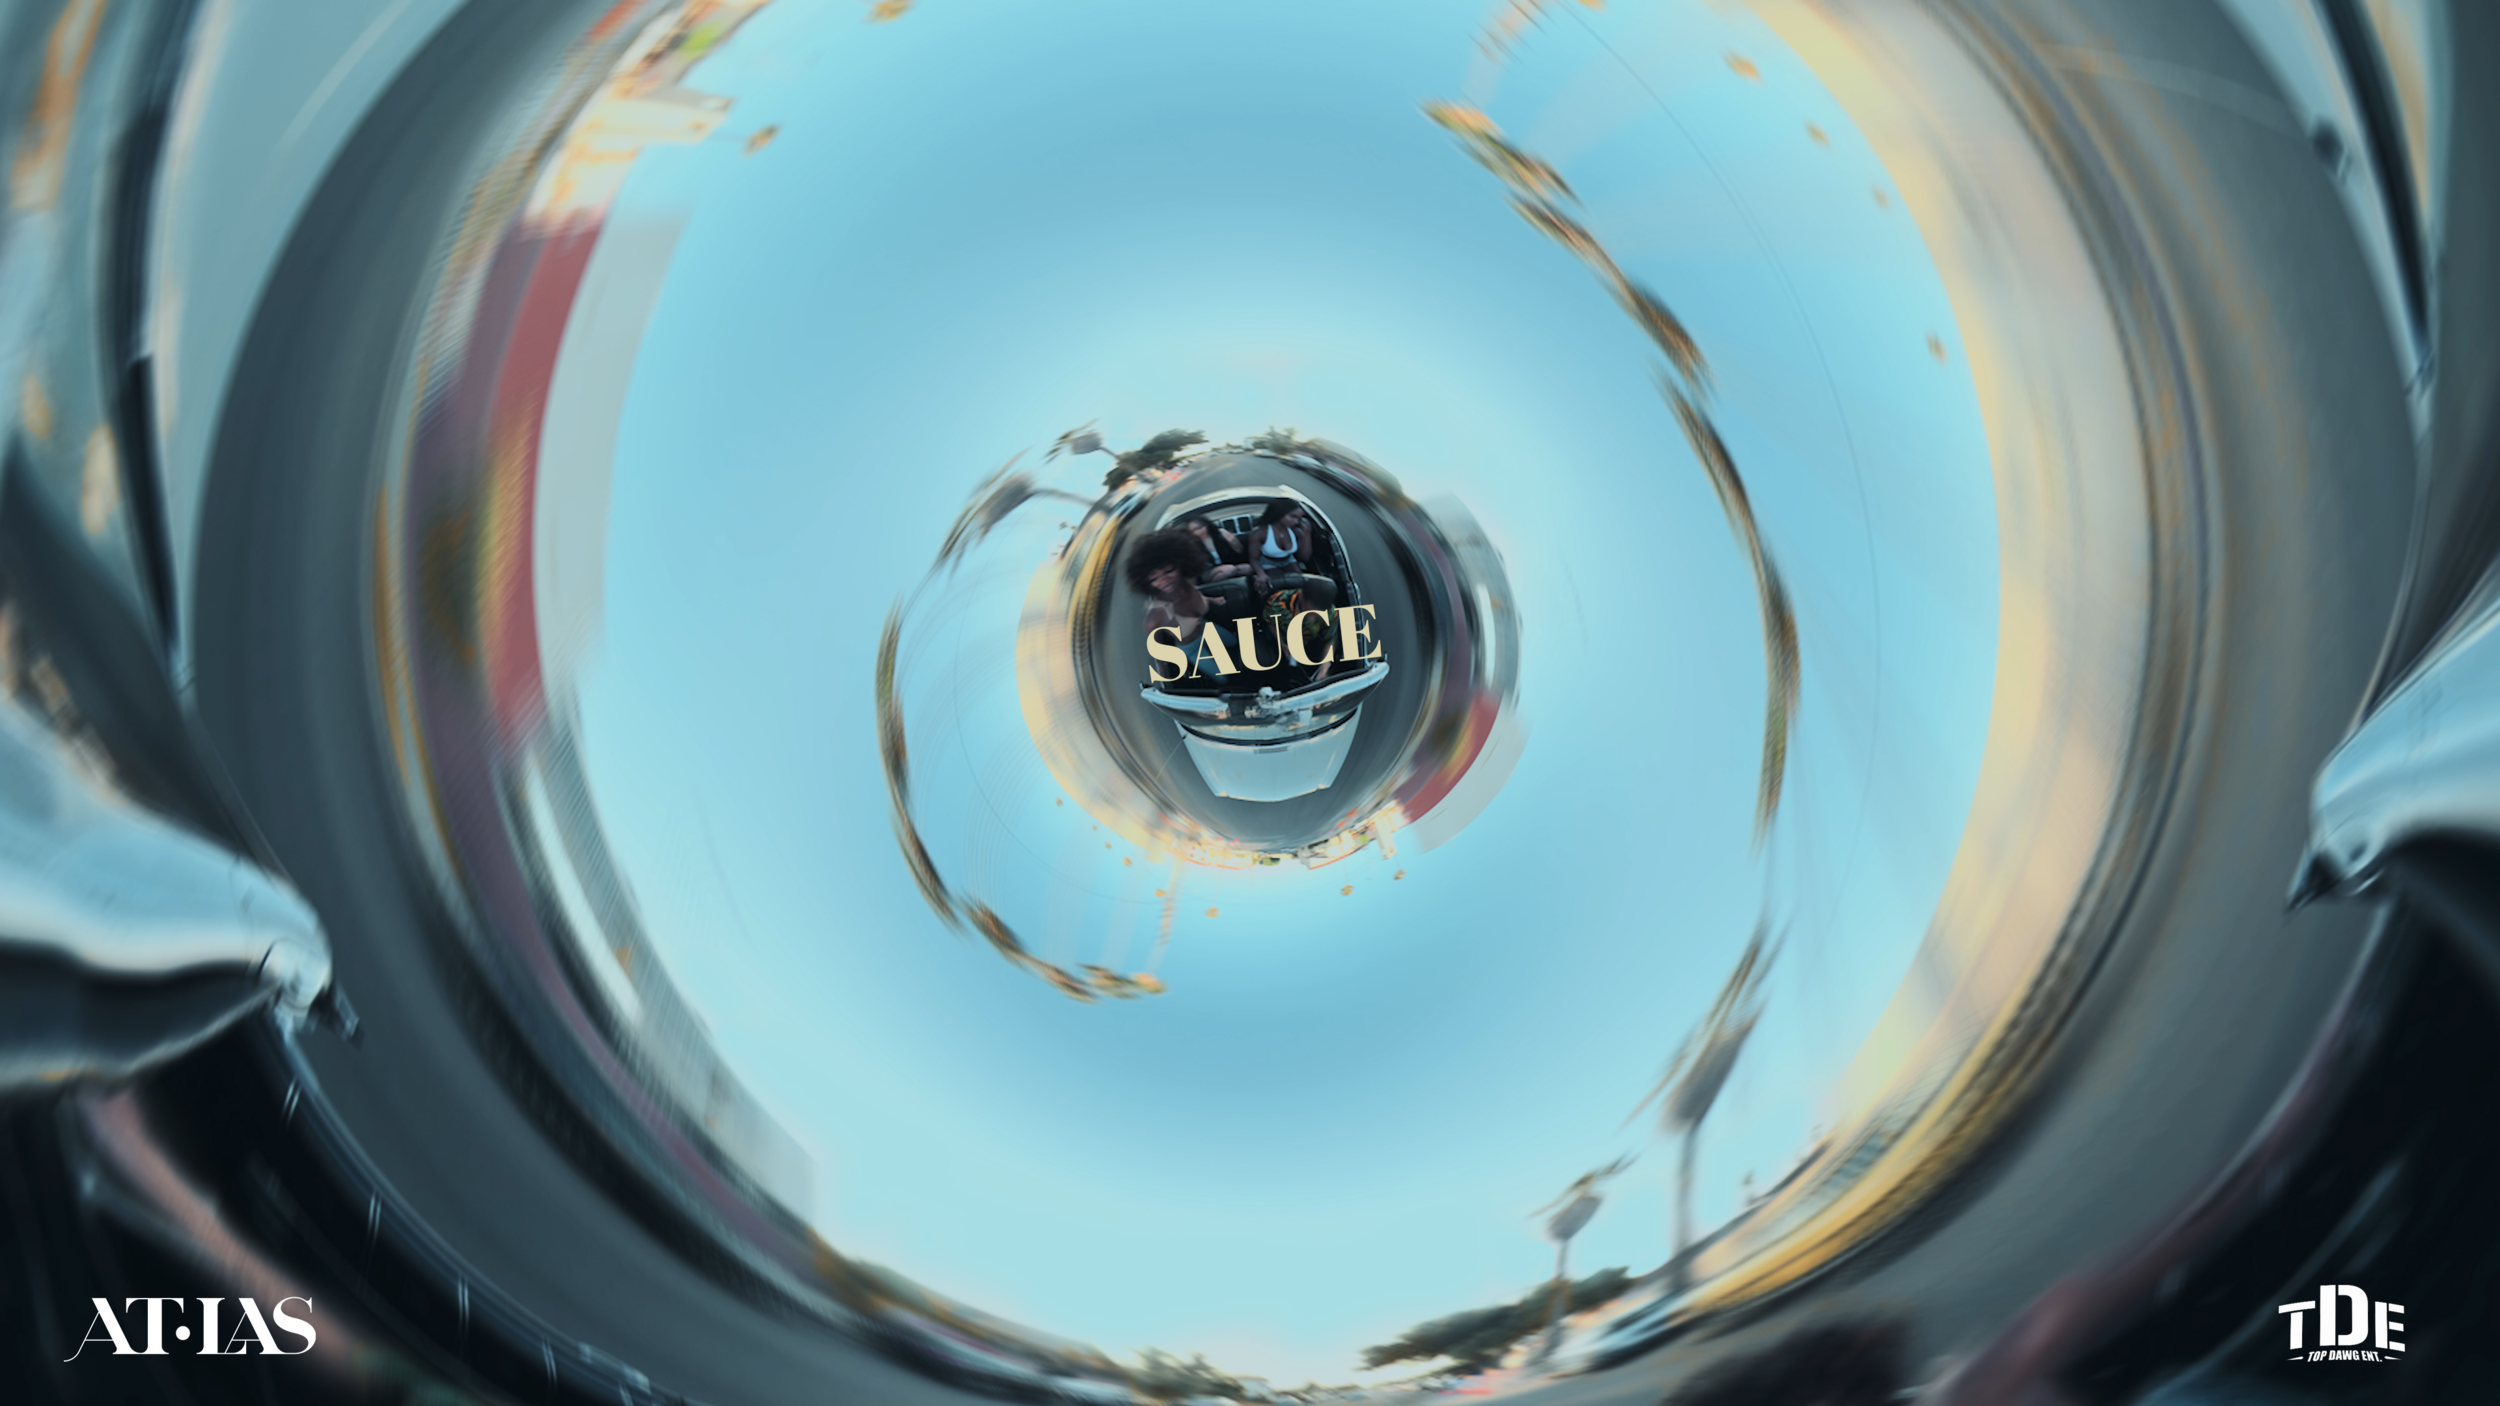 Sauce reason For colorV2.00_00_01_16.Still003.png